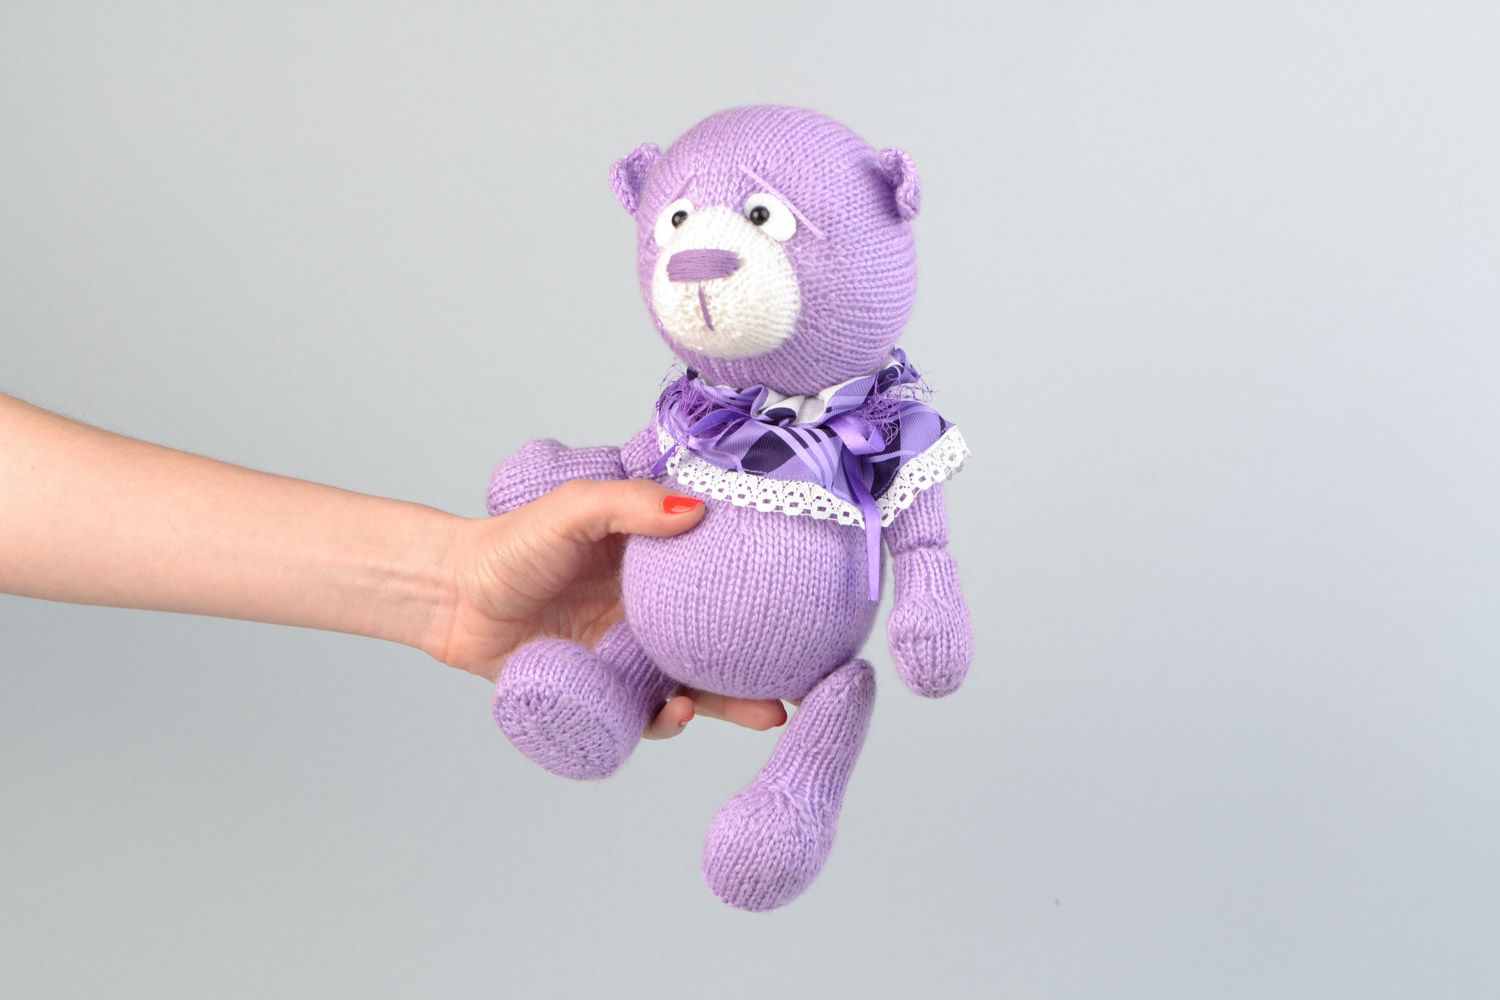 Handmade decorative crocheted purple bear toy with a bow for children photo 2